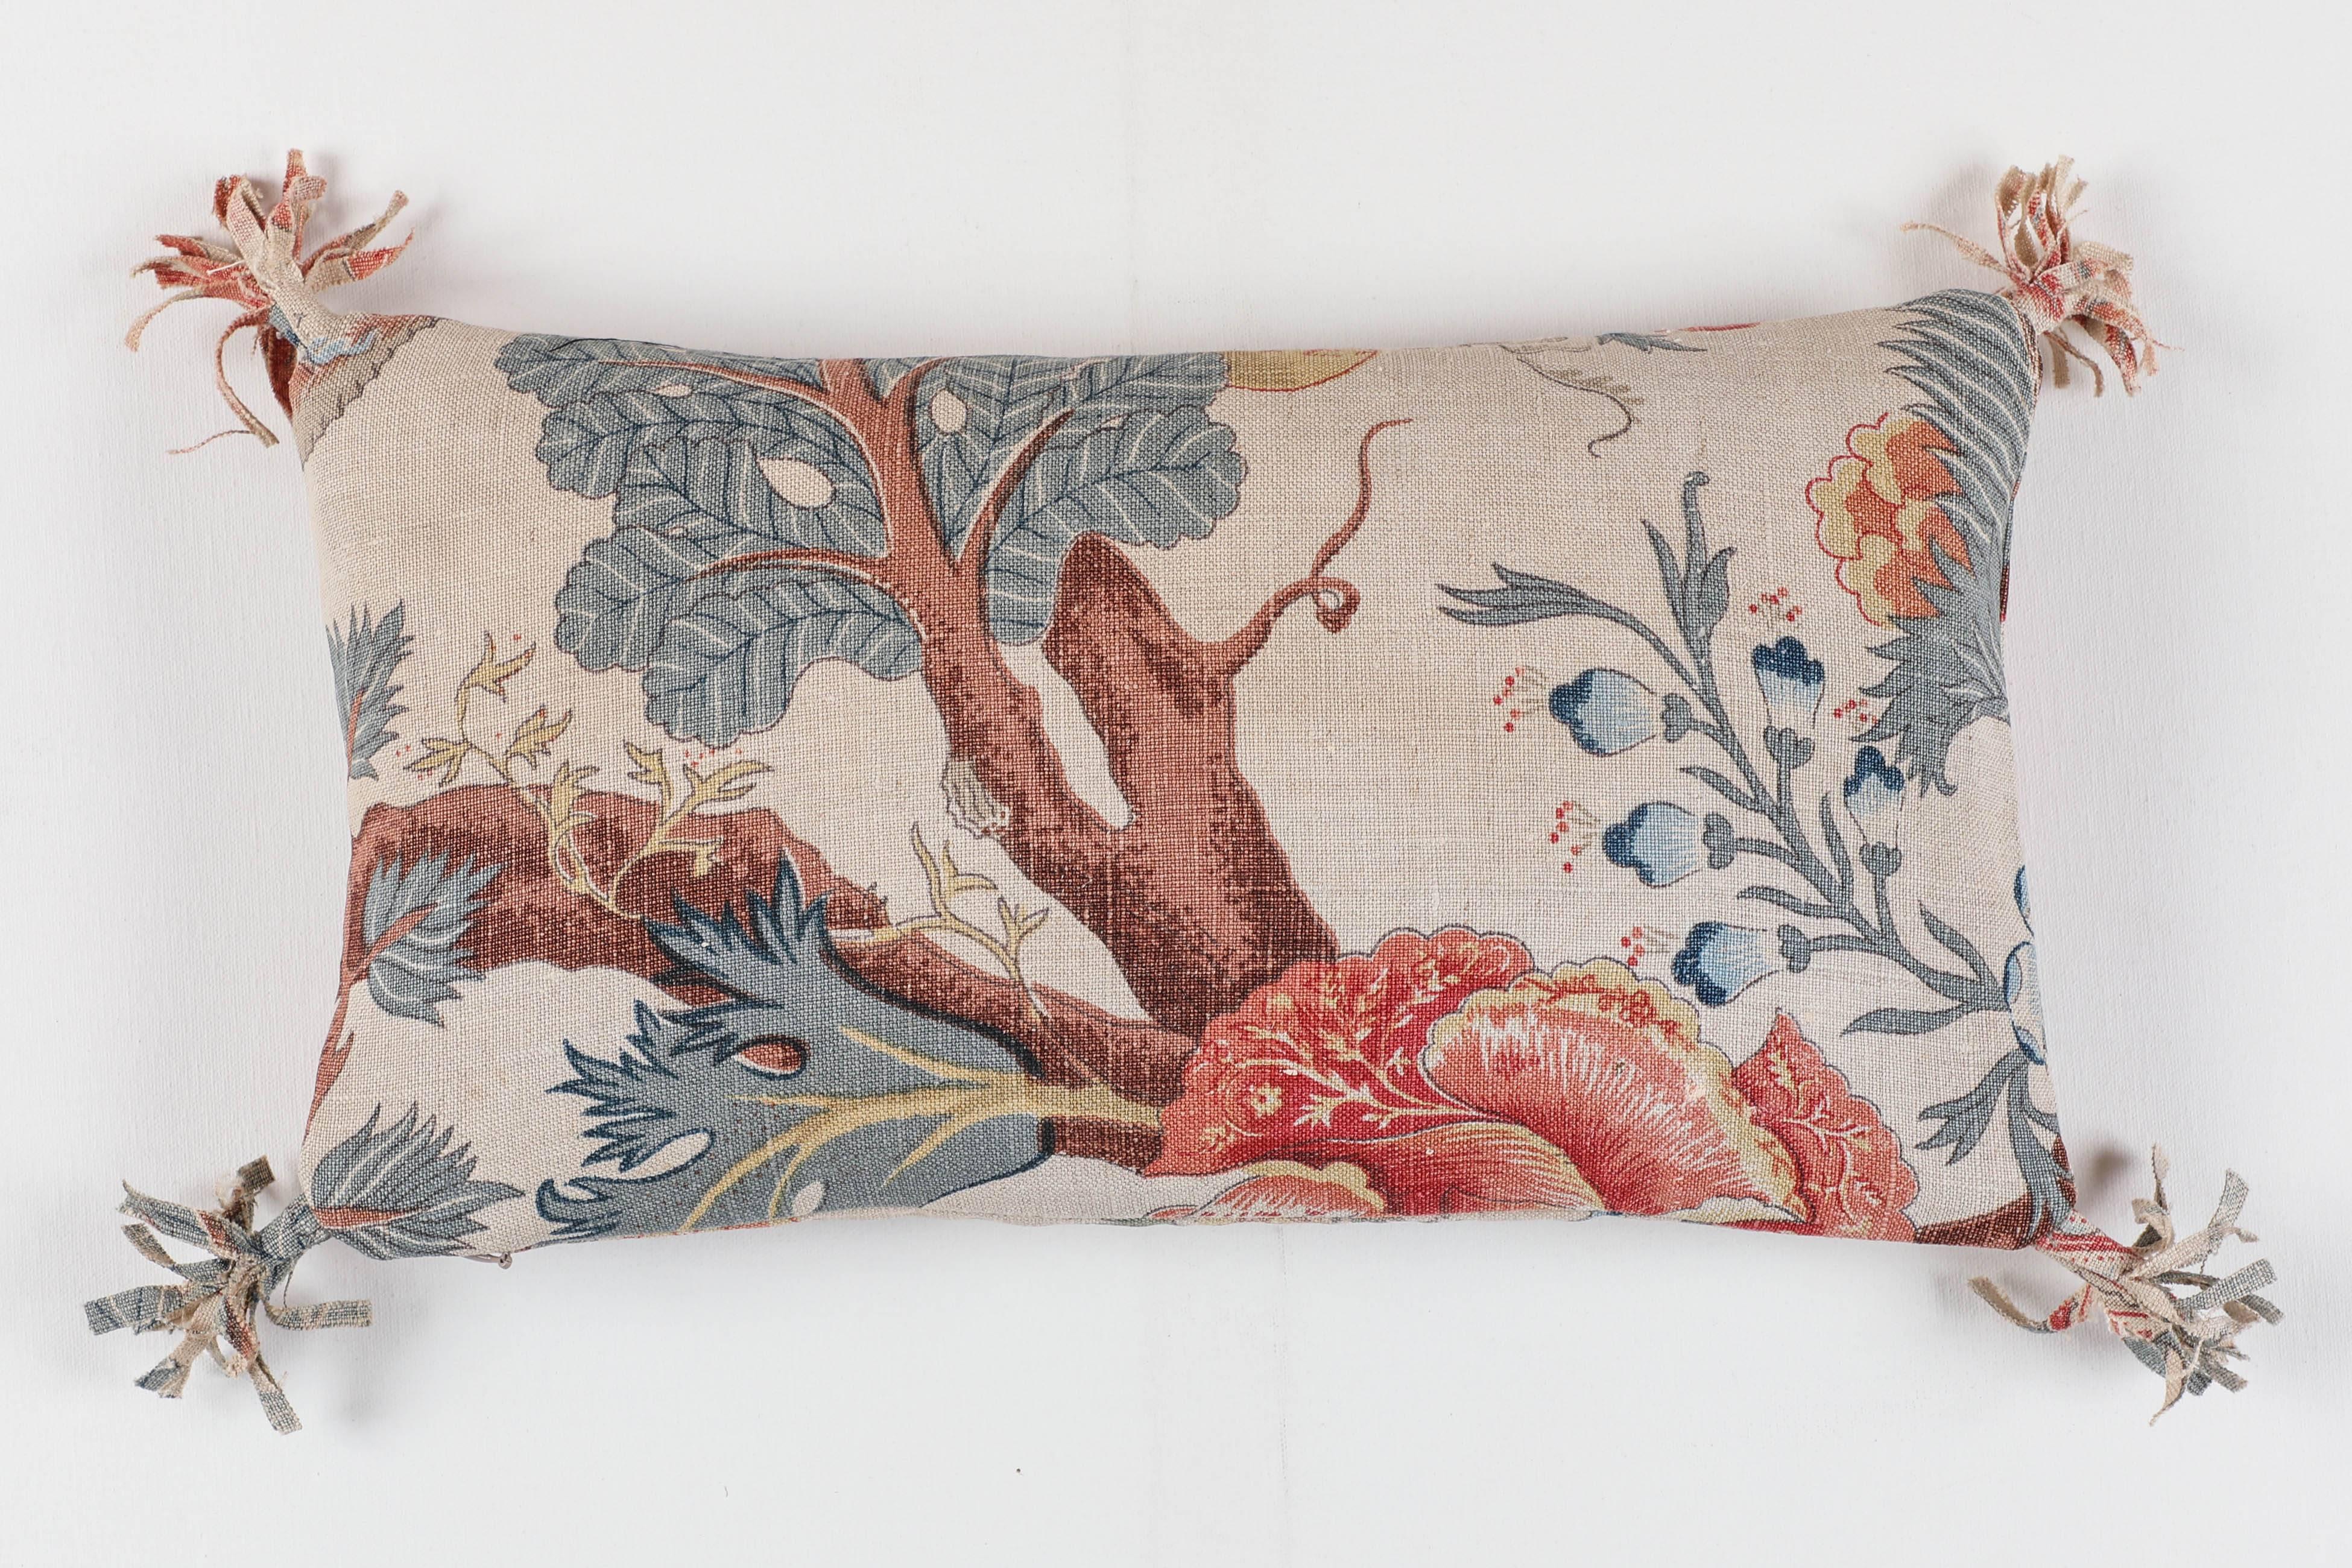 Woven Vintage Floral Linen Pillow Double-sided For Sale